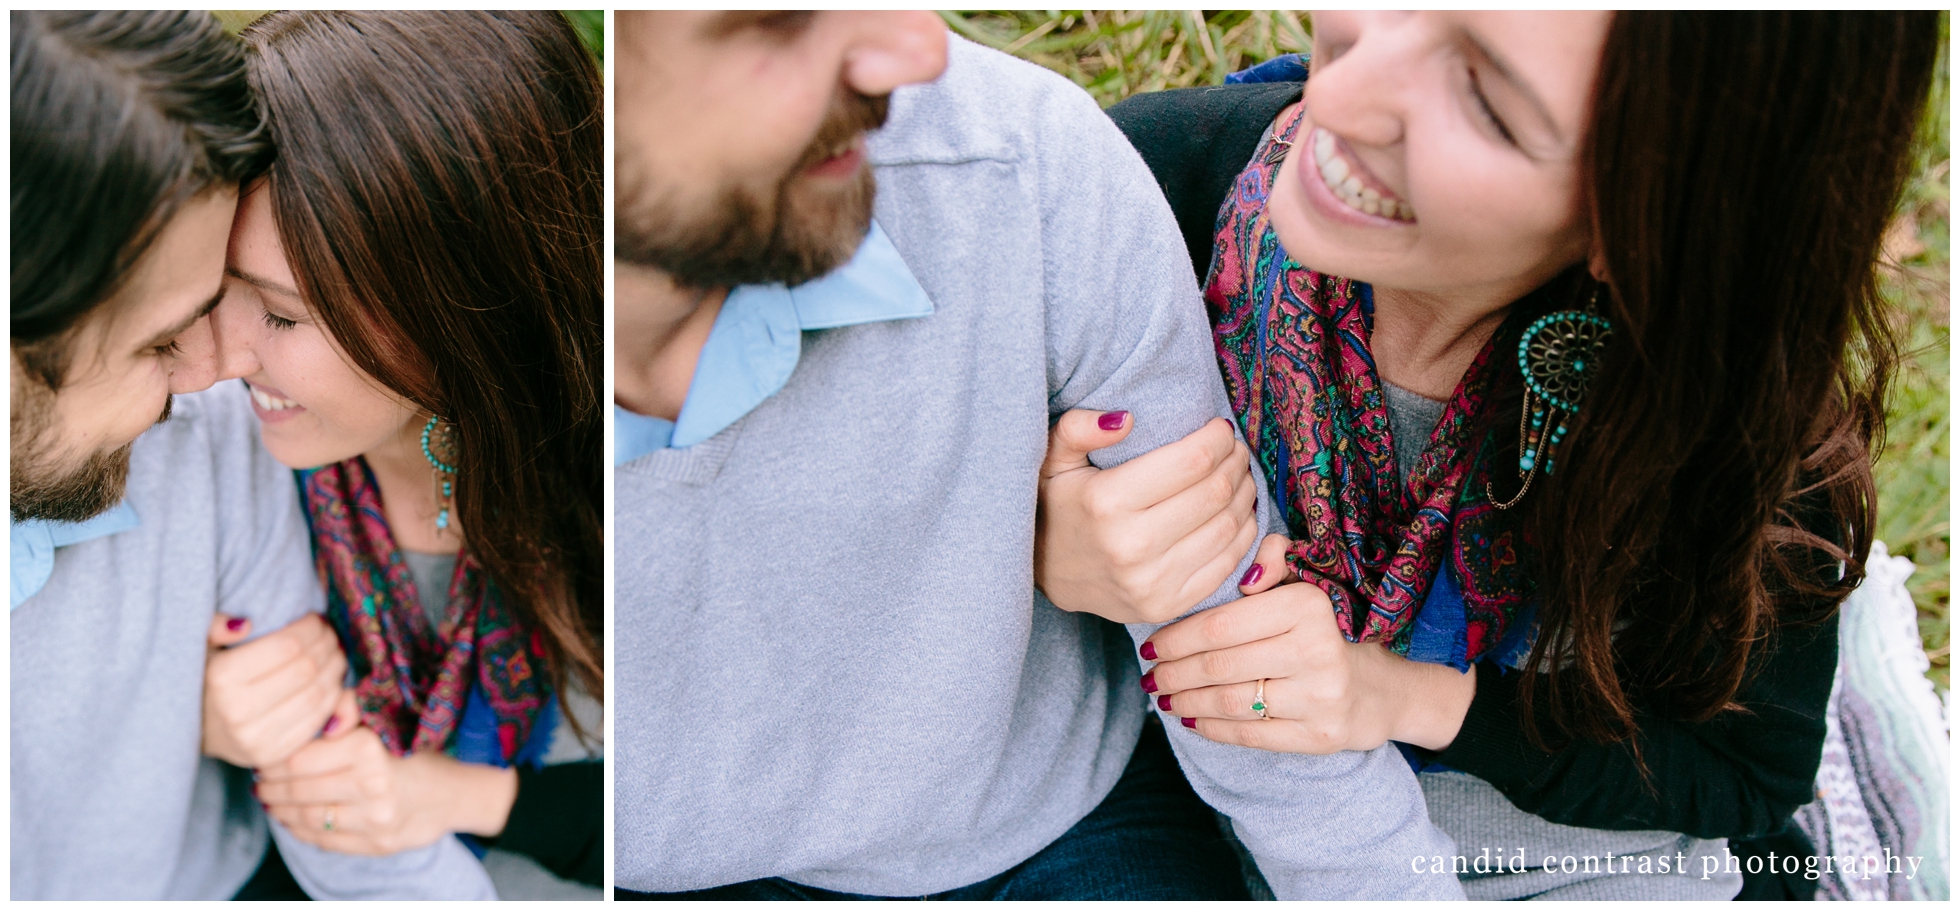 outdoor dubuque iowa picnic and wine engagement photos, iowa wedding photographer candid contrast photography 